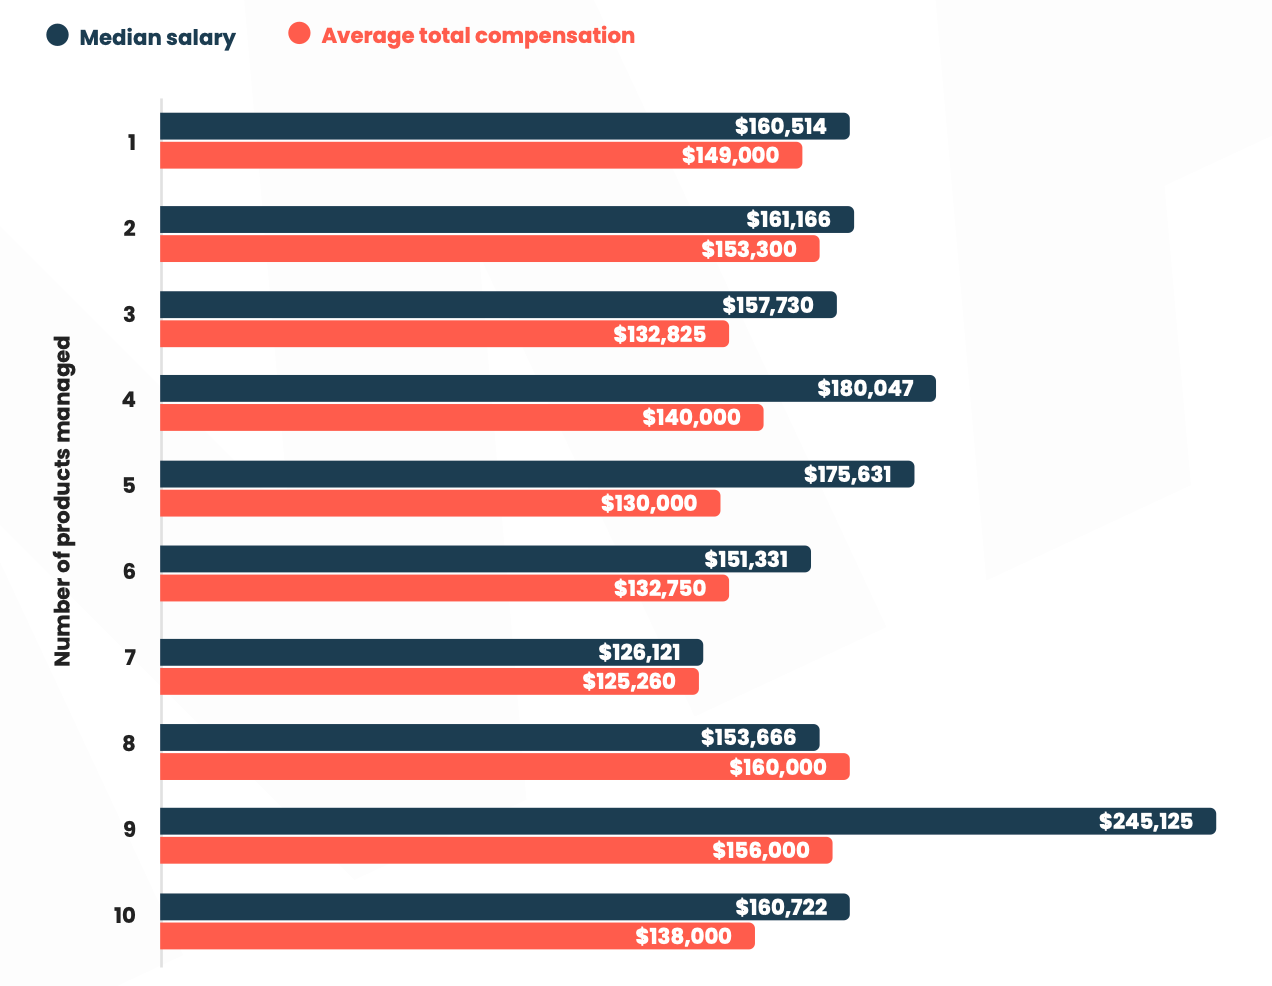 Number of products PMMs manage vs. their average total compensation and annual median salary.